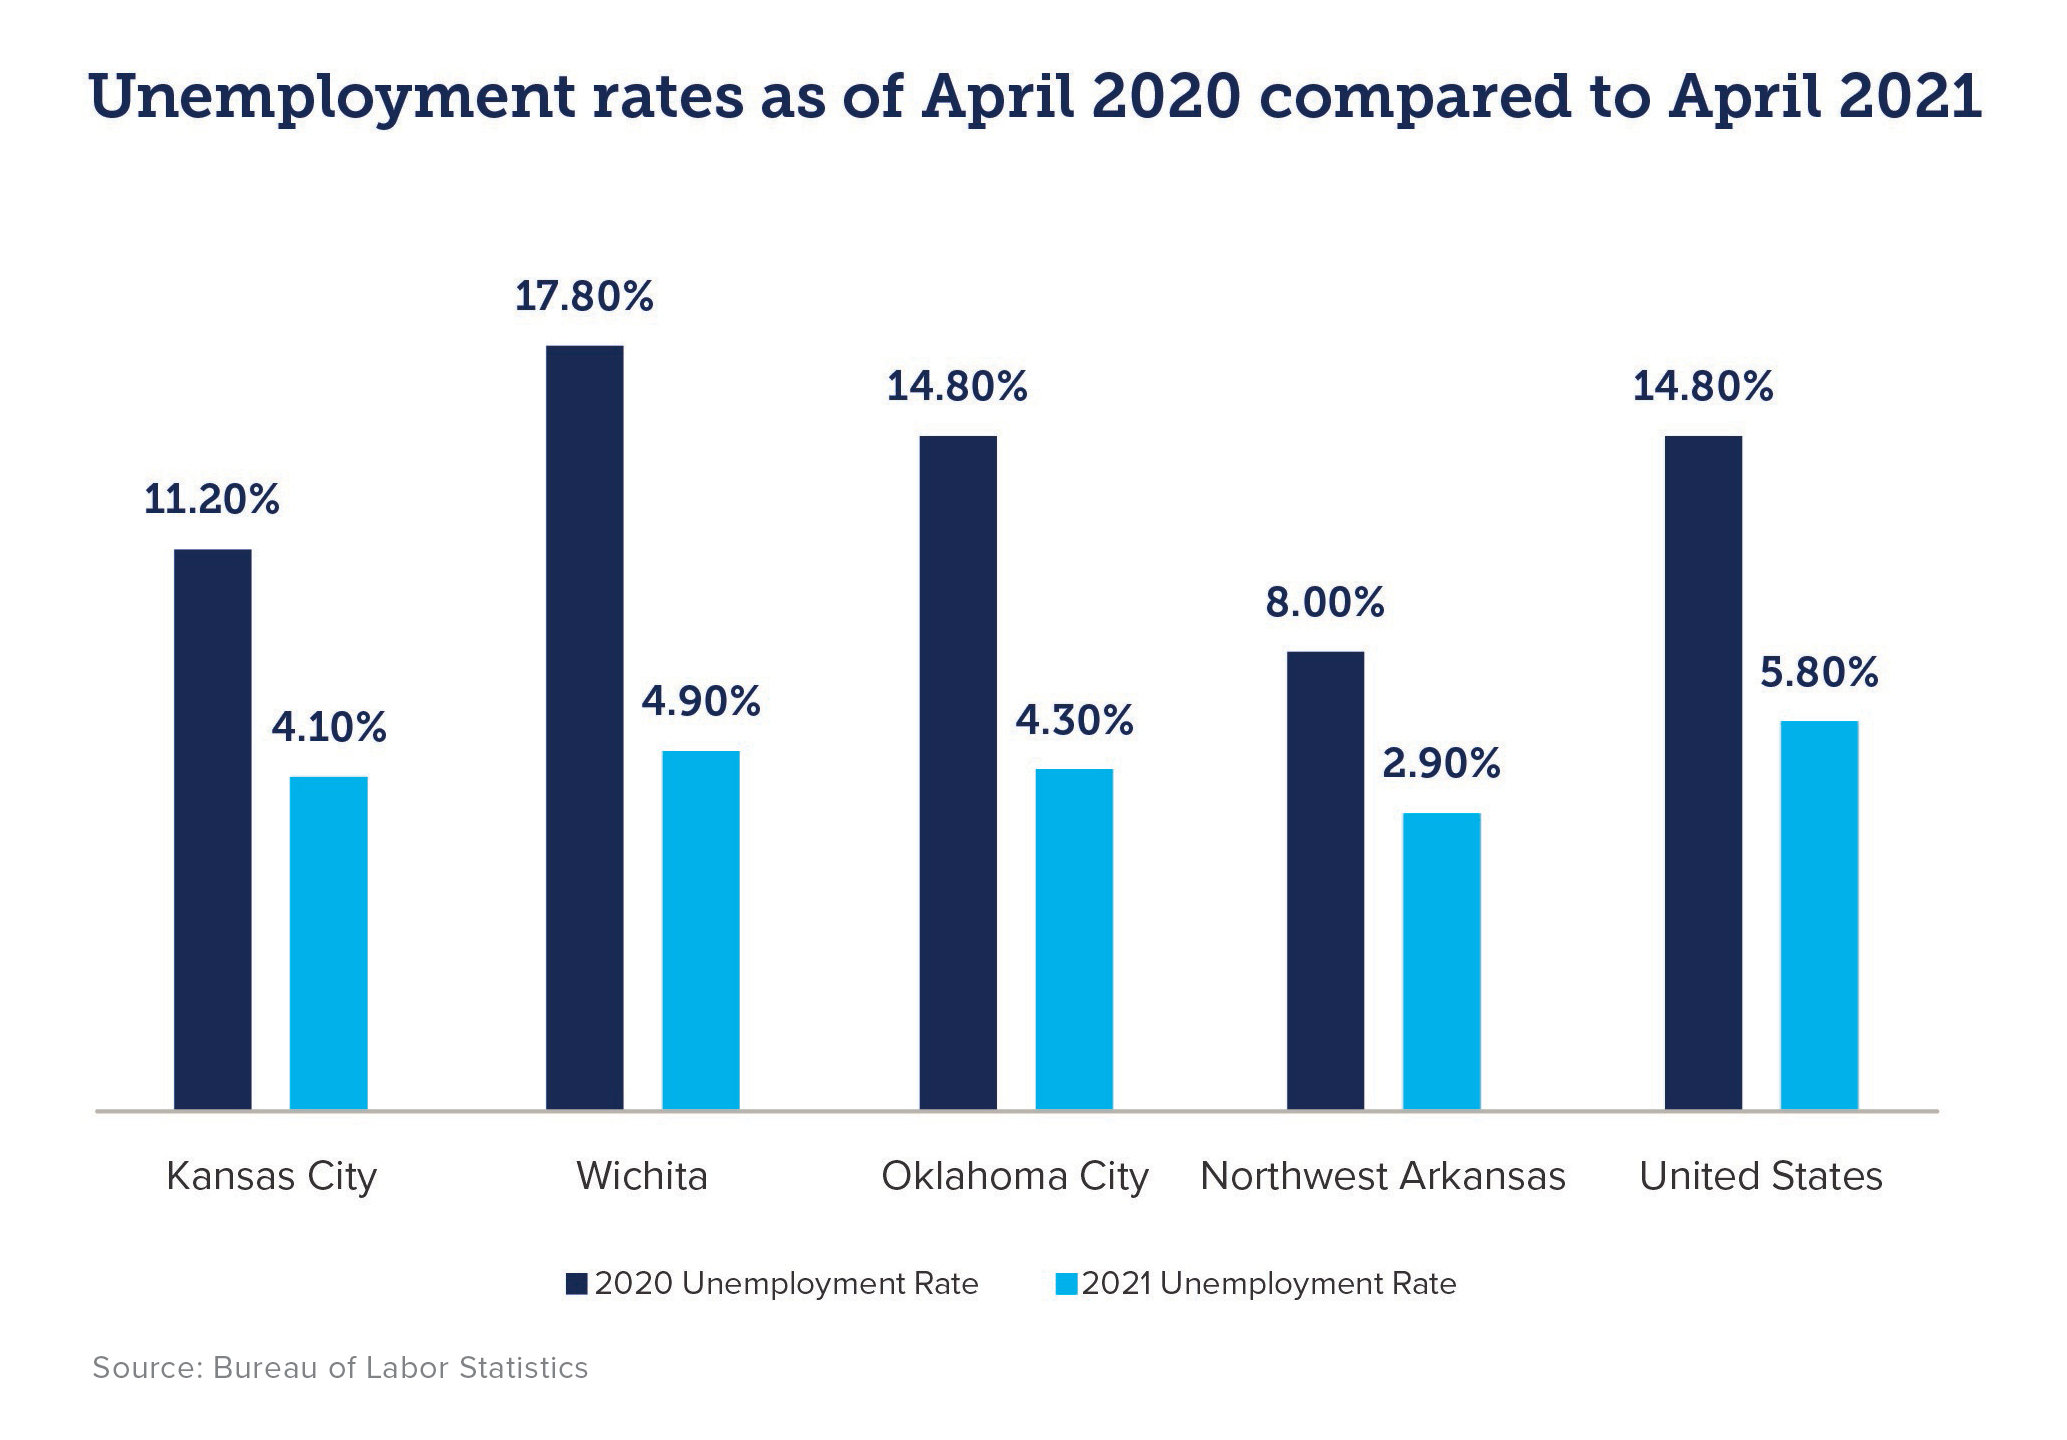 Unemployment rates as of April 2020 compared to April 2021